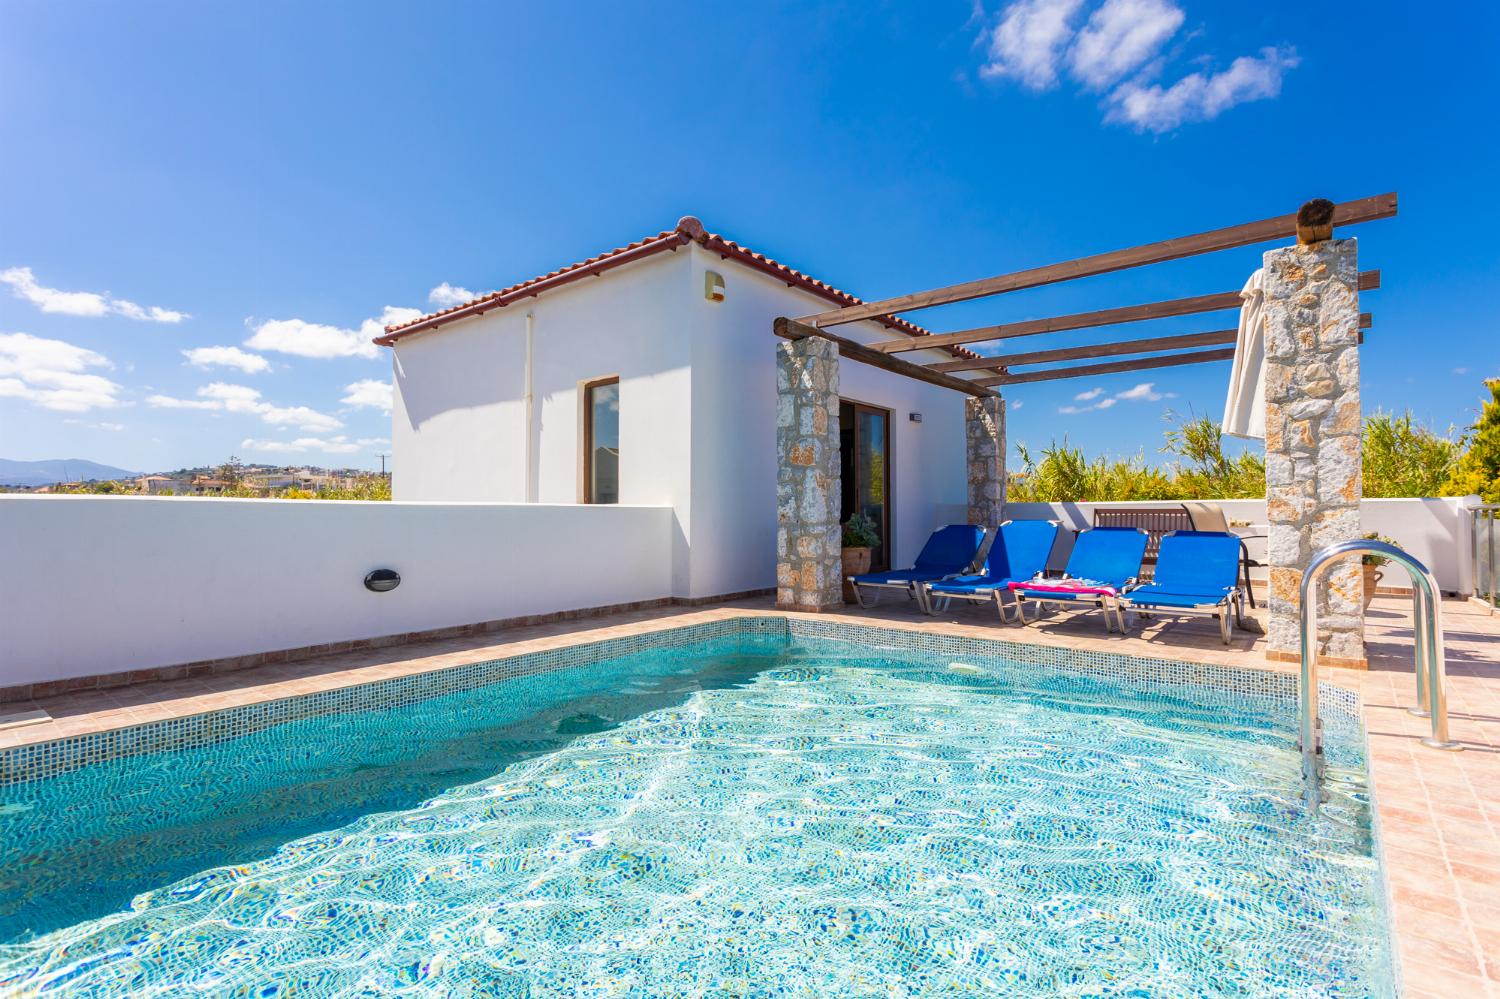 ,Beautiful villa with private pool, garden, and terrace with sea views